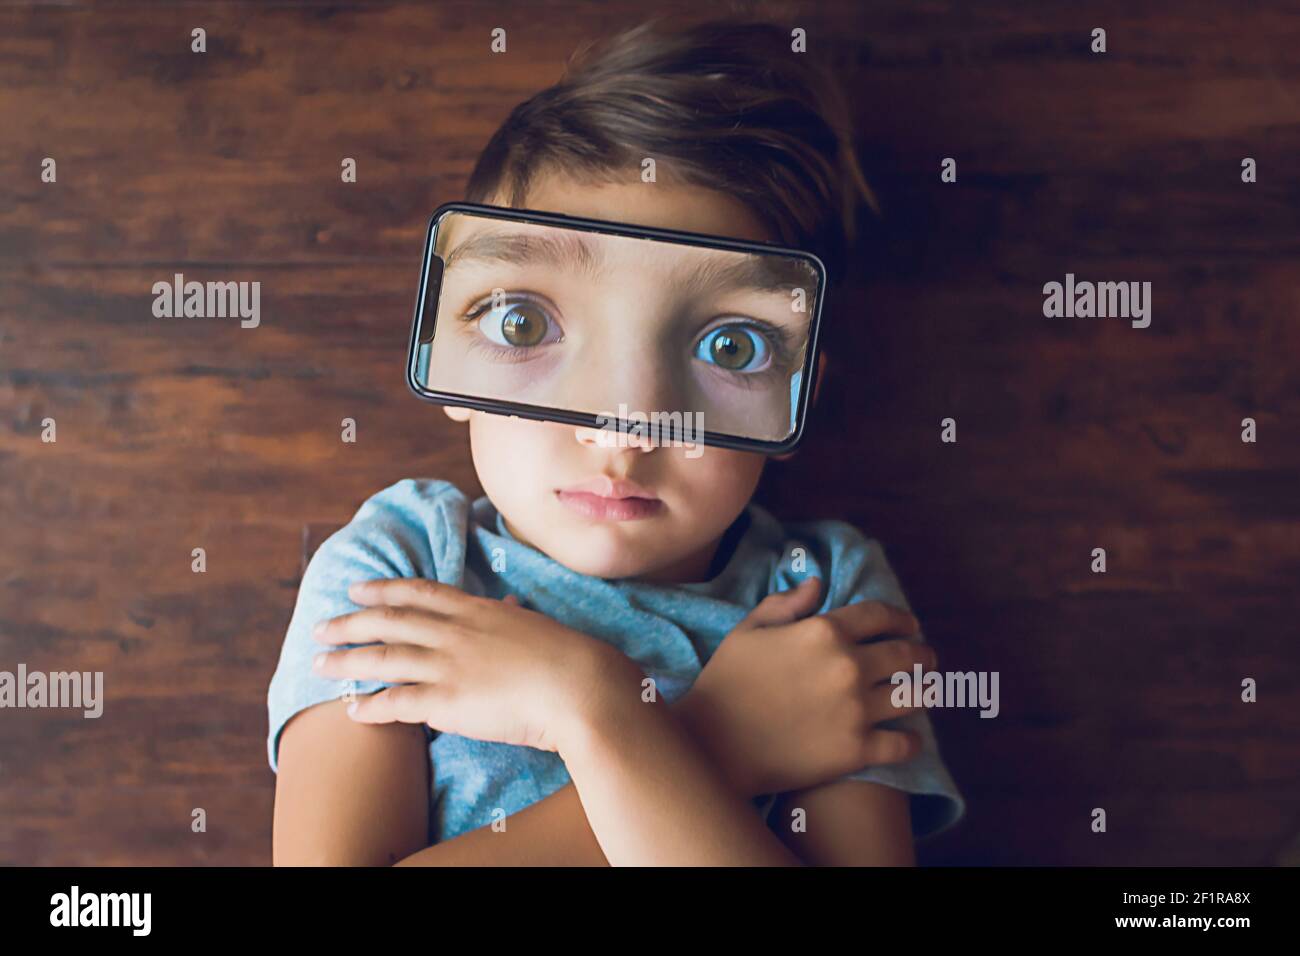 Boy laying on the ground with a phone photo of his eyes on top of face Stock Photo